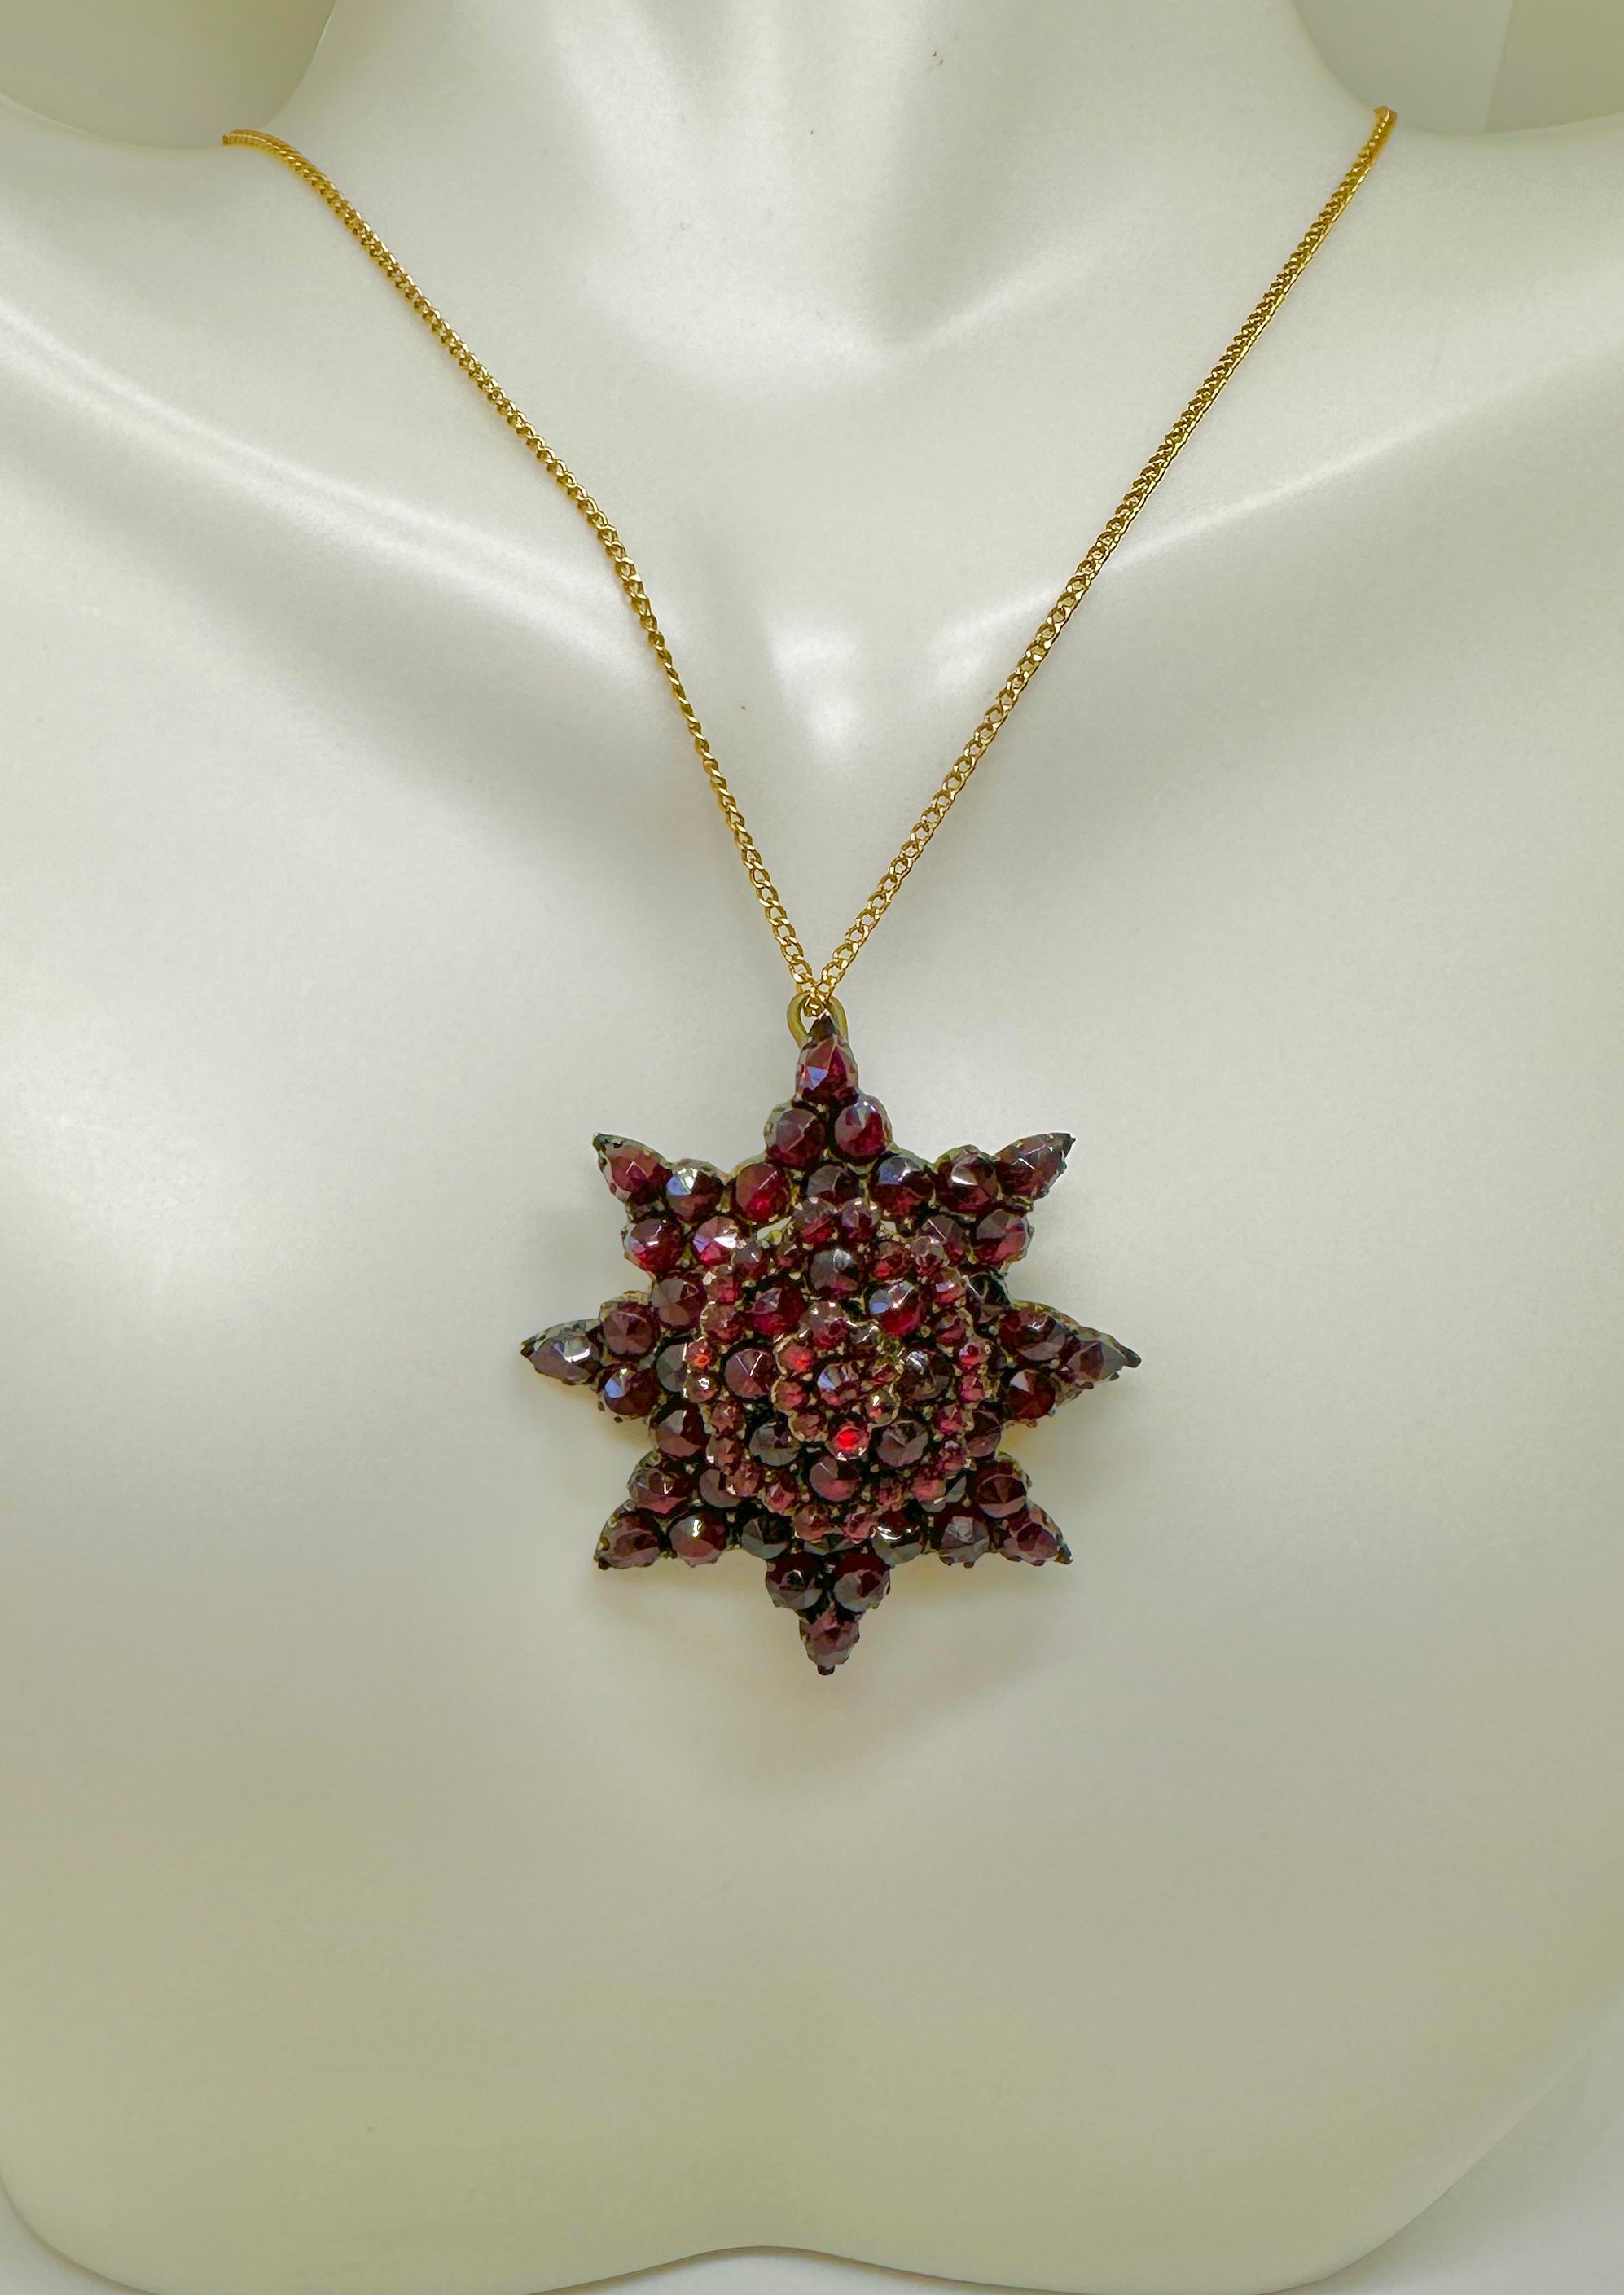 This is a gorgeous Belle Epoque - Victorian Bohemian Garnet Locket Pendant or Brooch in a stunning star motif.  The early oval locket pendant is adorned with three layers of faceted garnets.  The garnets are pear shape and round and are of